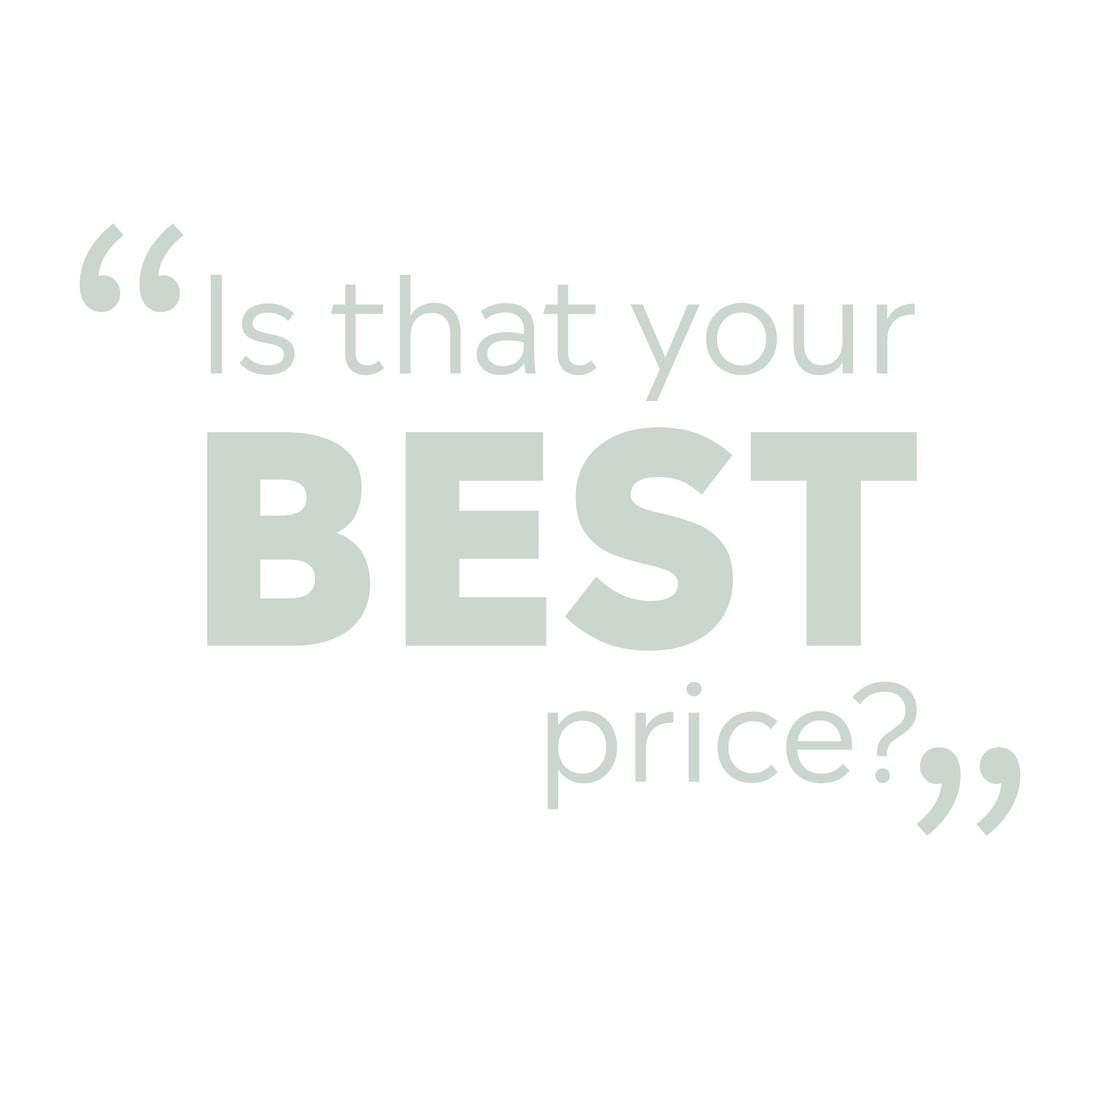 Is that your best price?